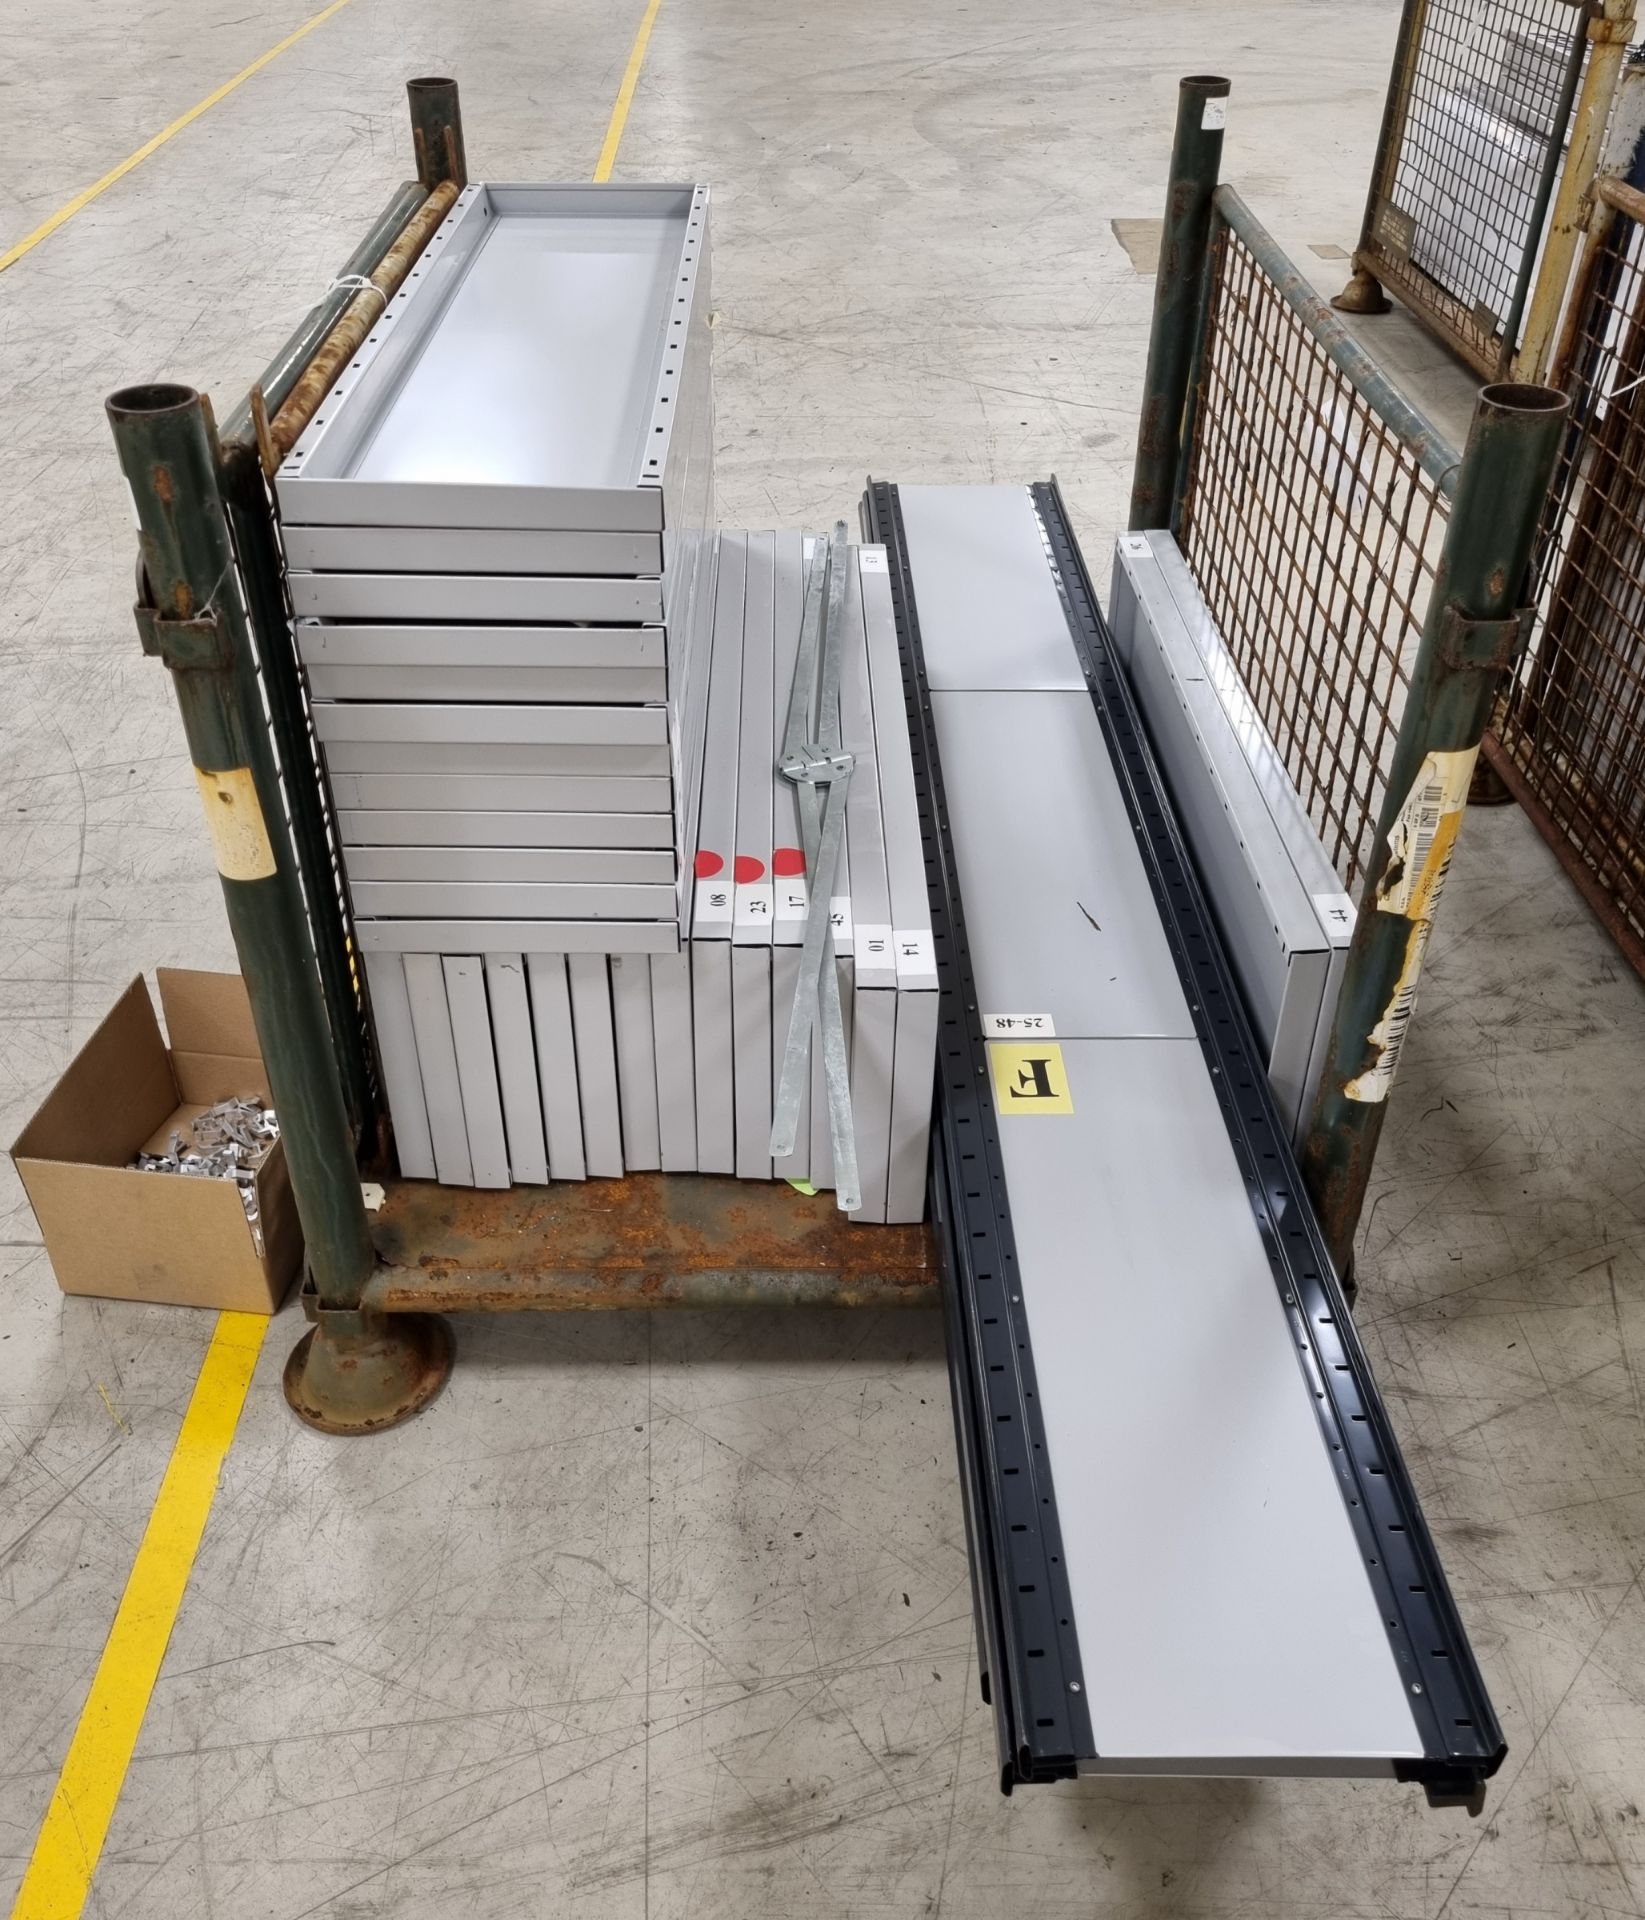 2x sets of Industrial 4 bay shelving assemblies - see description for details - Image 6 of 6